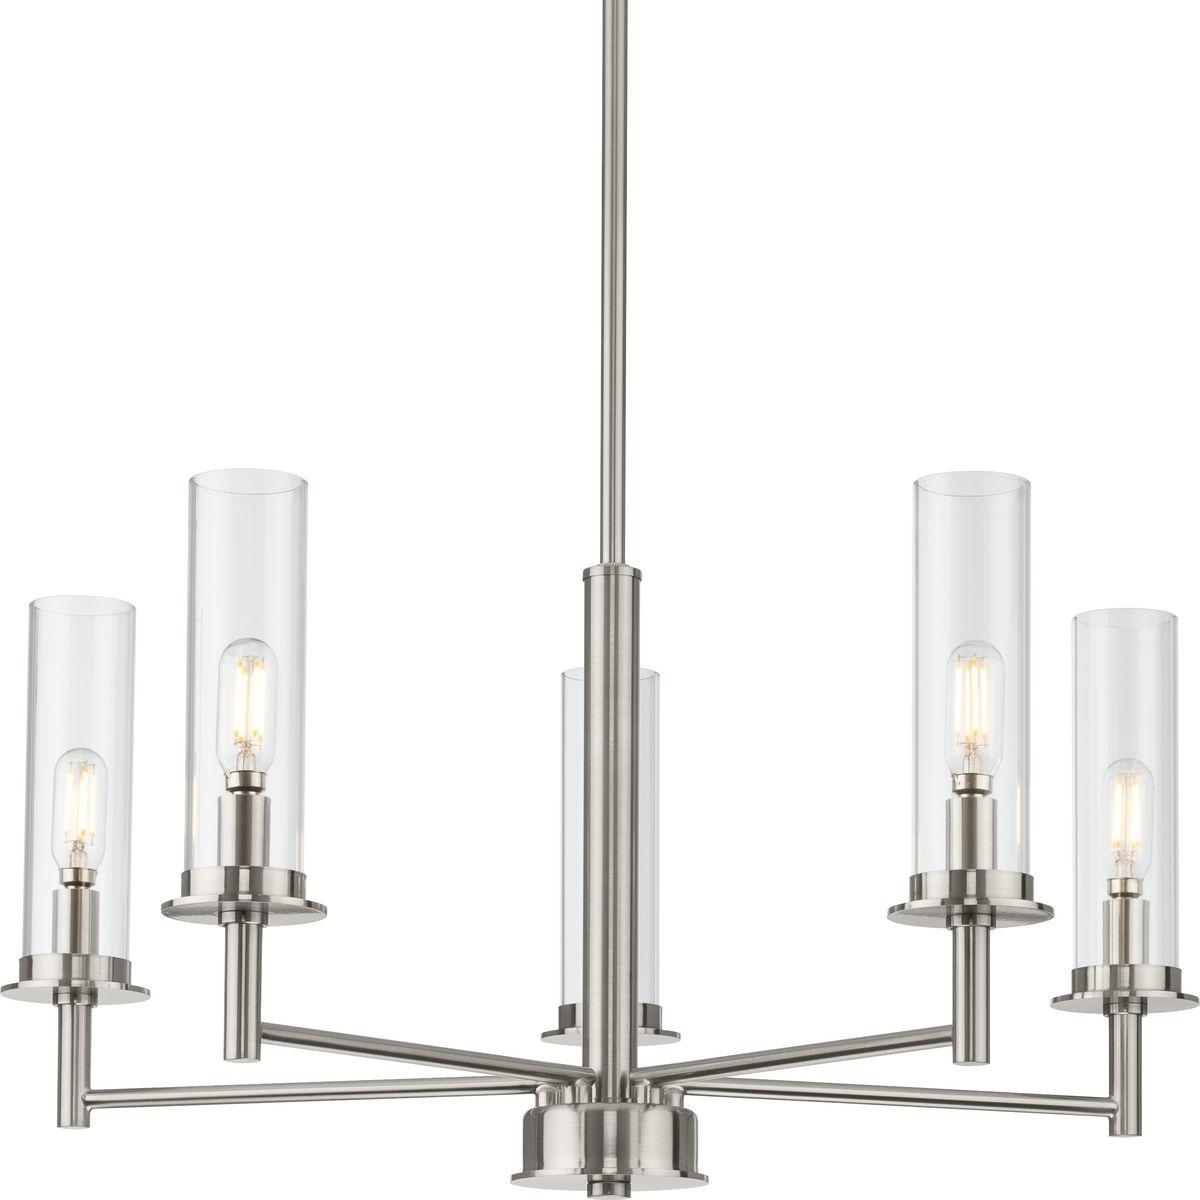 Hubbell P400251-009 Balance the best of modern and traditional with the Kellwyn Collection 5-Light Brushed Nickel Clear Glass Transitional Chandelier Light. The classic frame with crisp, clean lines is coated in a beautiful brushed nickel finish. Light sources glow from insi